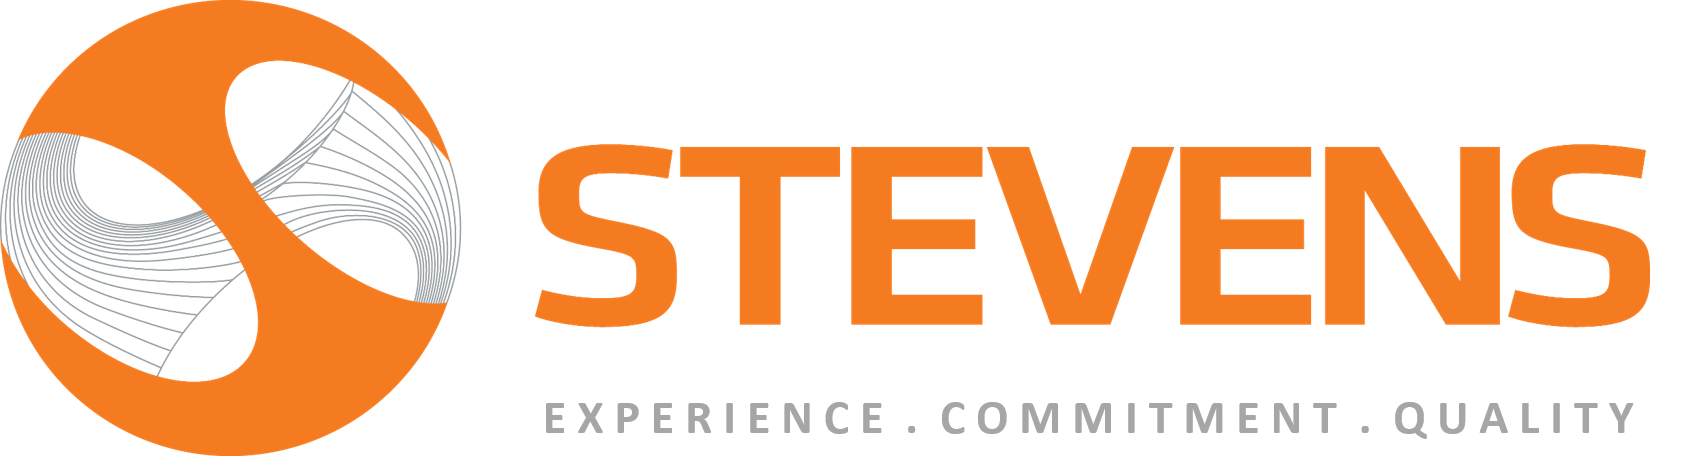 Stevens-Logo-with-Tag-Line.png